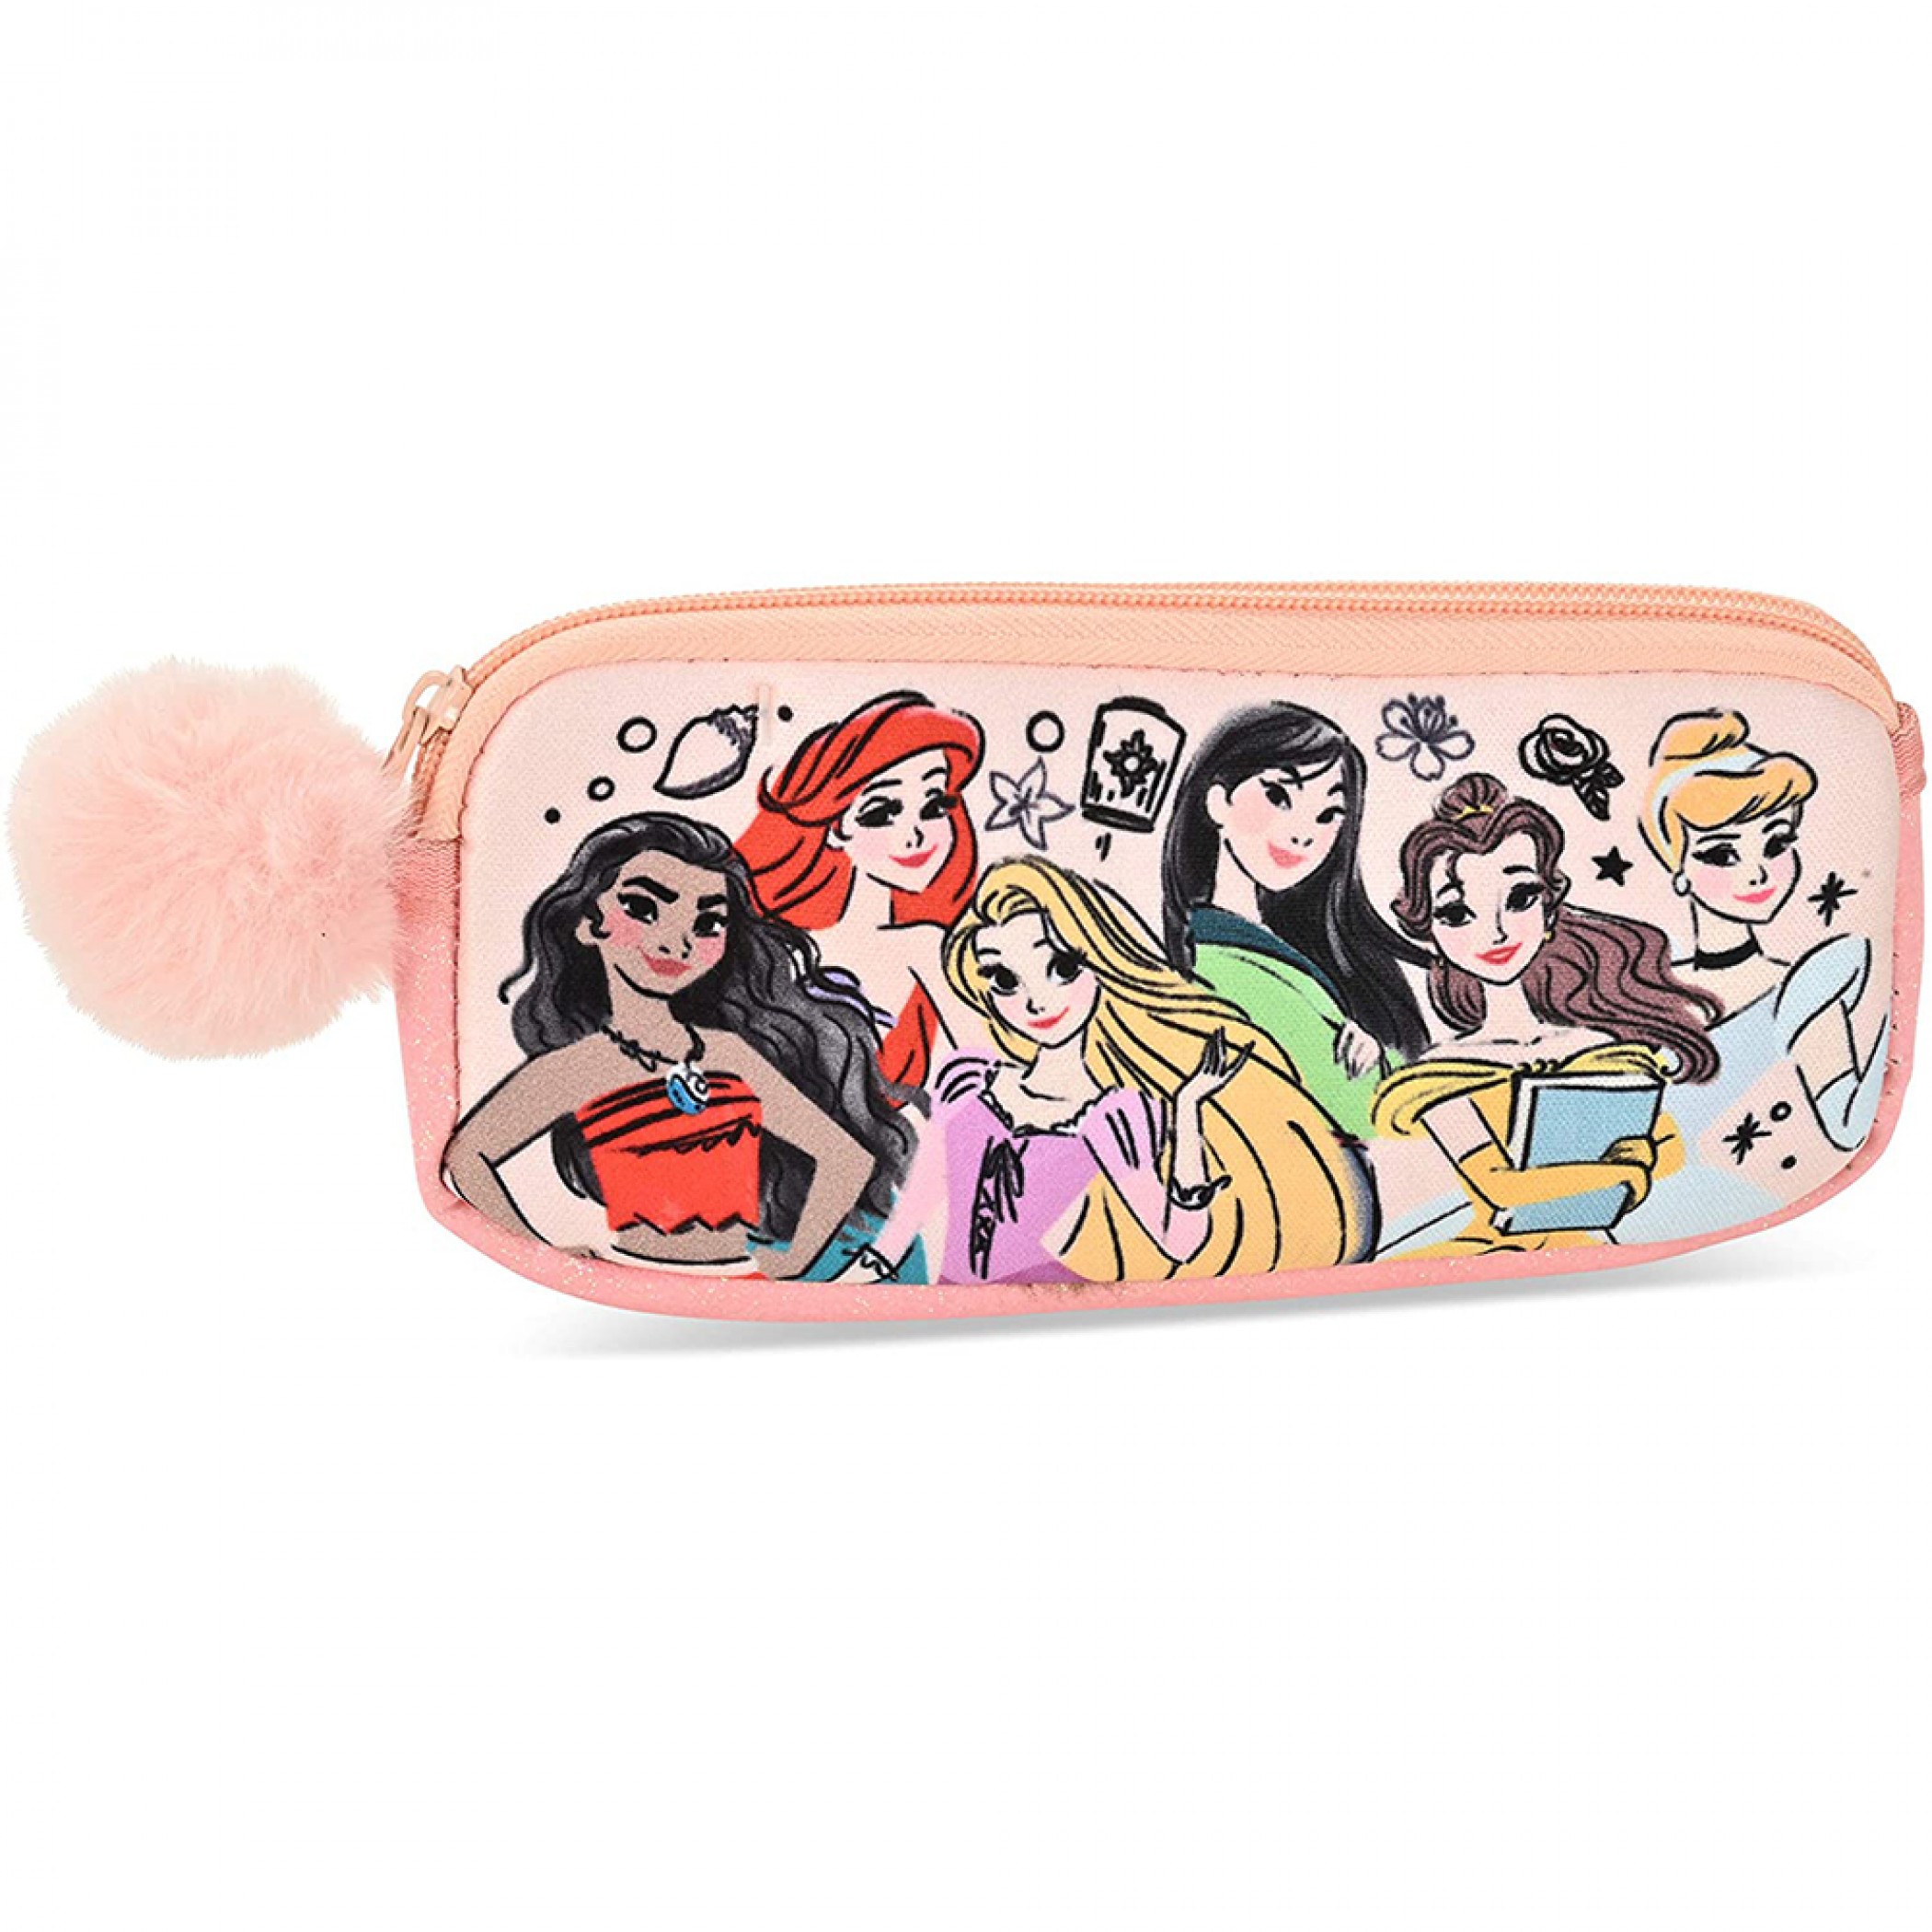 https://mmv2api.s3.us-east-2.amazonaws.com/products/images/Pan%20Oceanic%20Disney%20Princess%20Girls%20Sunglasses%20with%20Matching%20Glasses%20Case%20for%20Kids-6.jpg